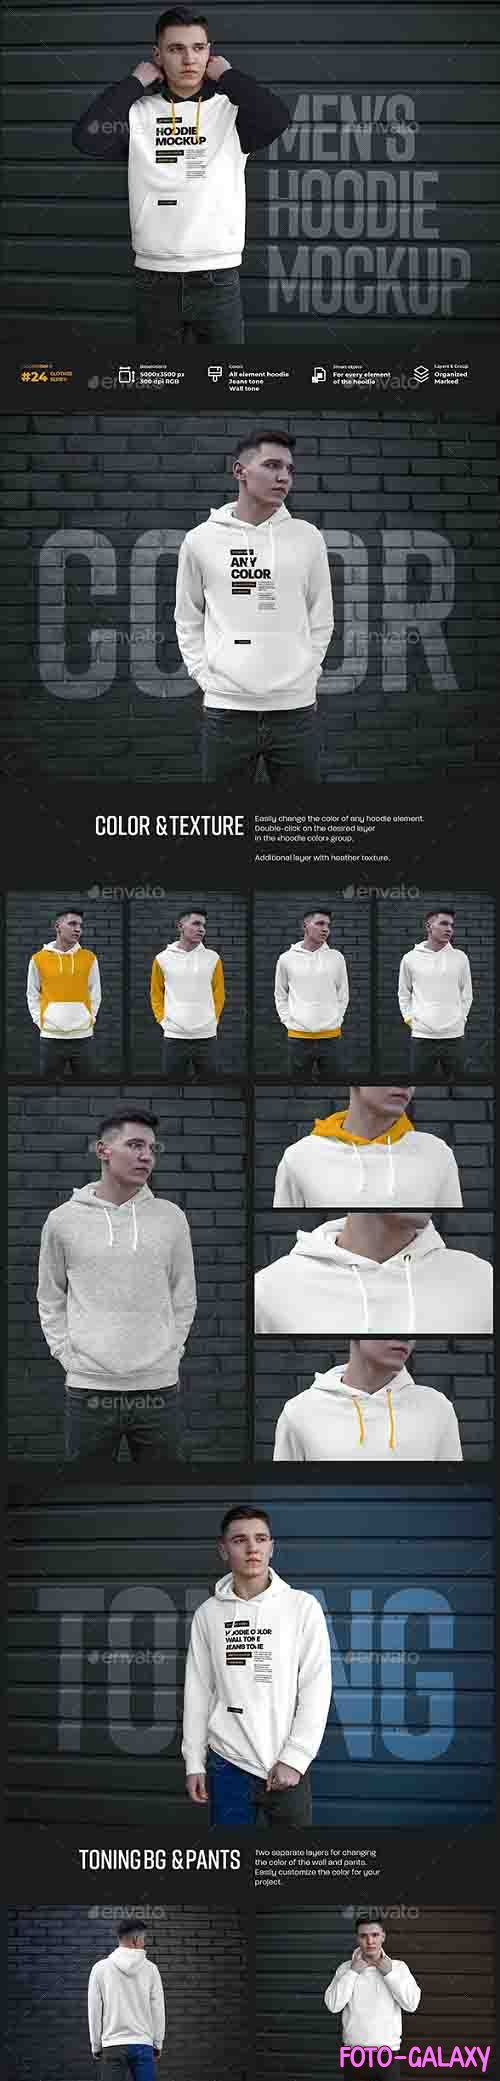 GraphicRiver - 7 Mockups Hoodie on the Man. Urban Style 30321874